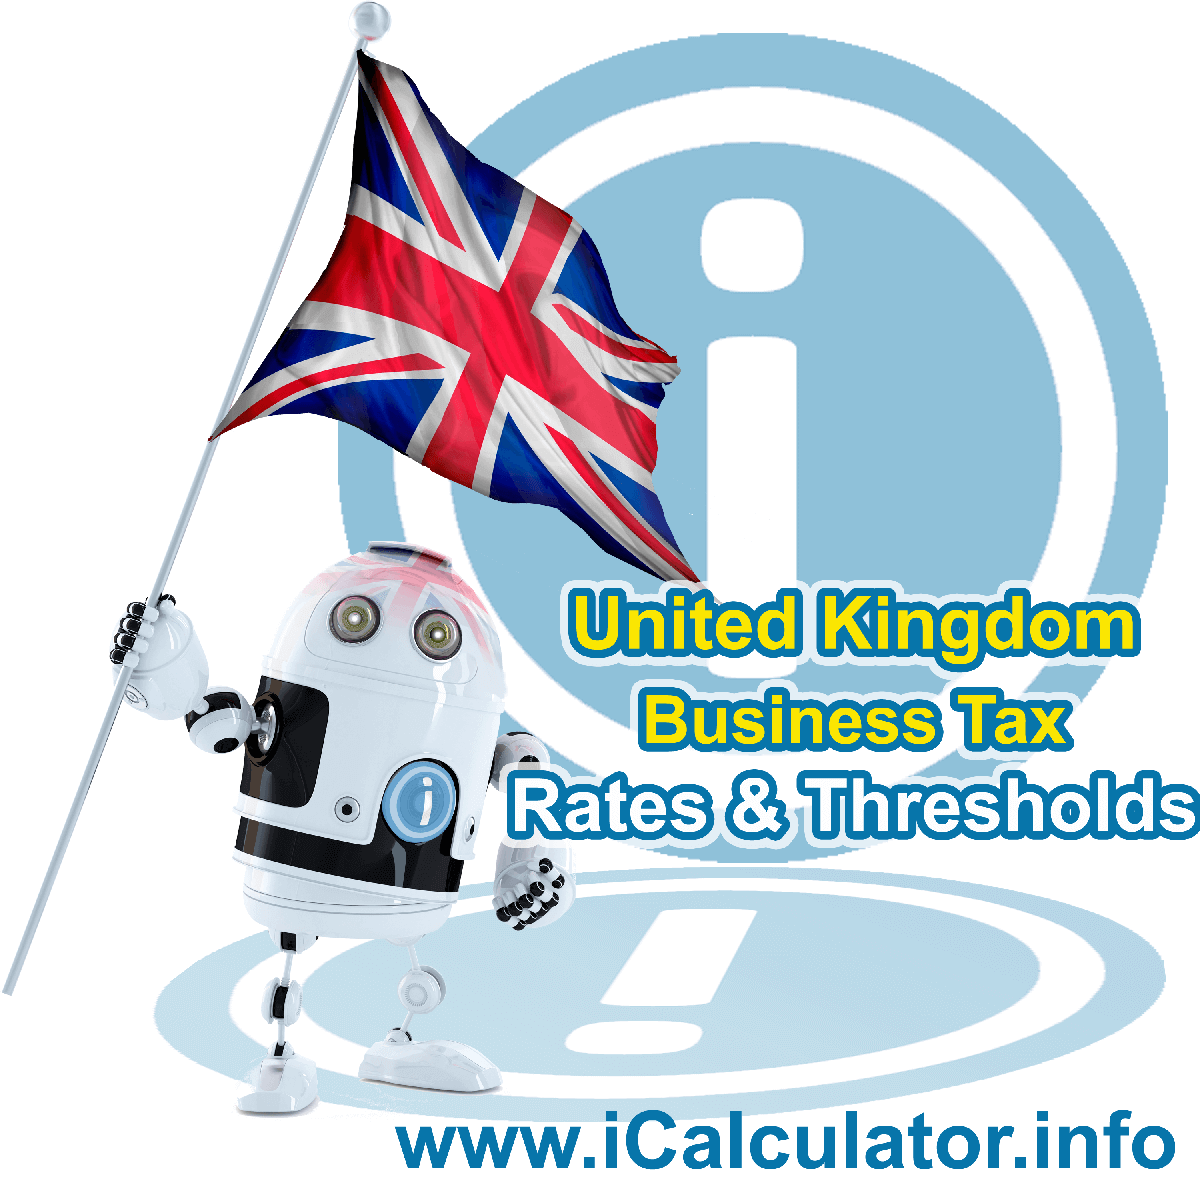 United Kingdom Corporation Tax Rates in 2022. This image shows the United Kingdom flag and information relating to the corporation tax formula for the United Kingdom Corporation Tax Calculator in 2022